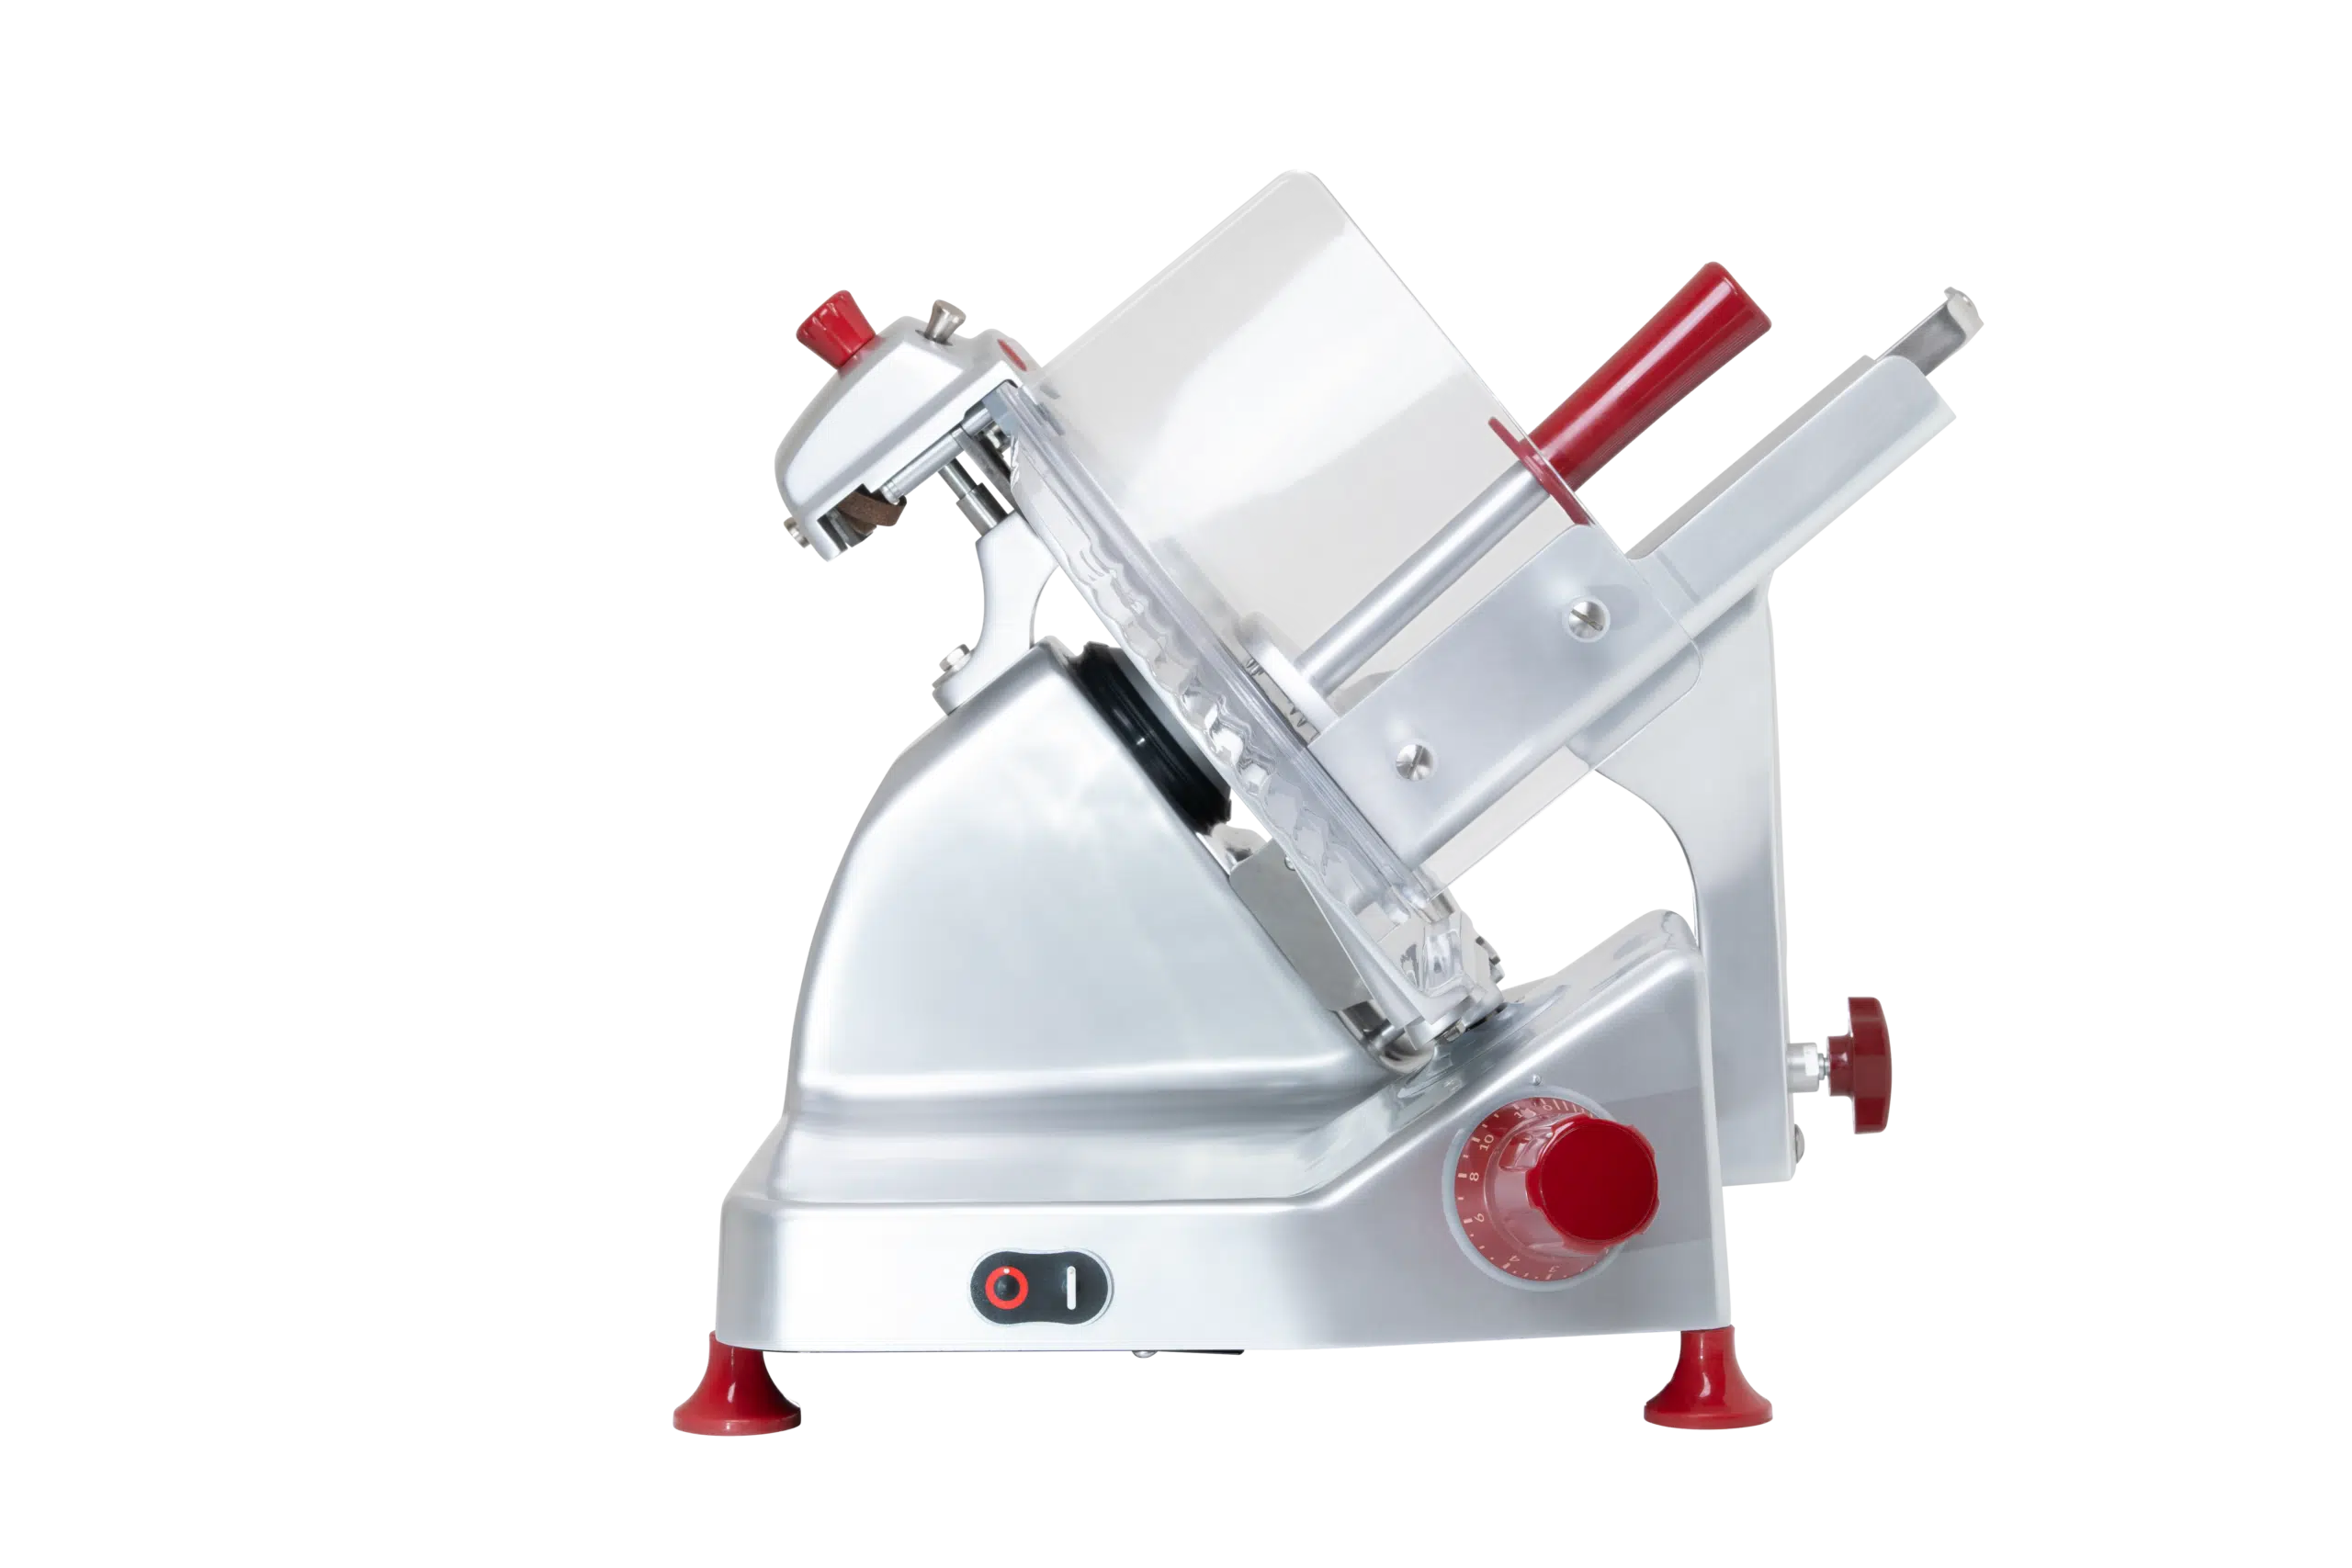 The newest electric gravity feed slicer, Pro Line XS30, great slicing performance, an easy-to-clean design, and high-performance materials